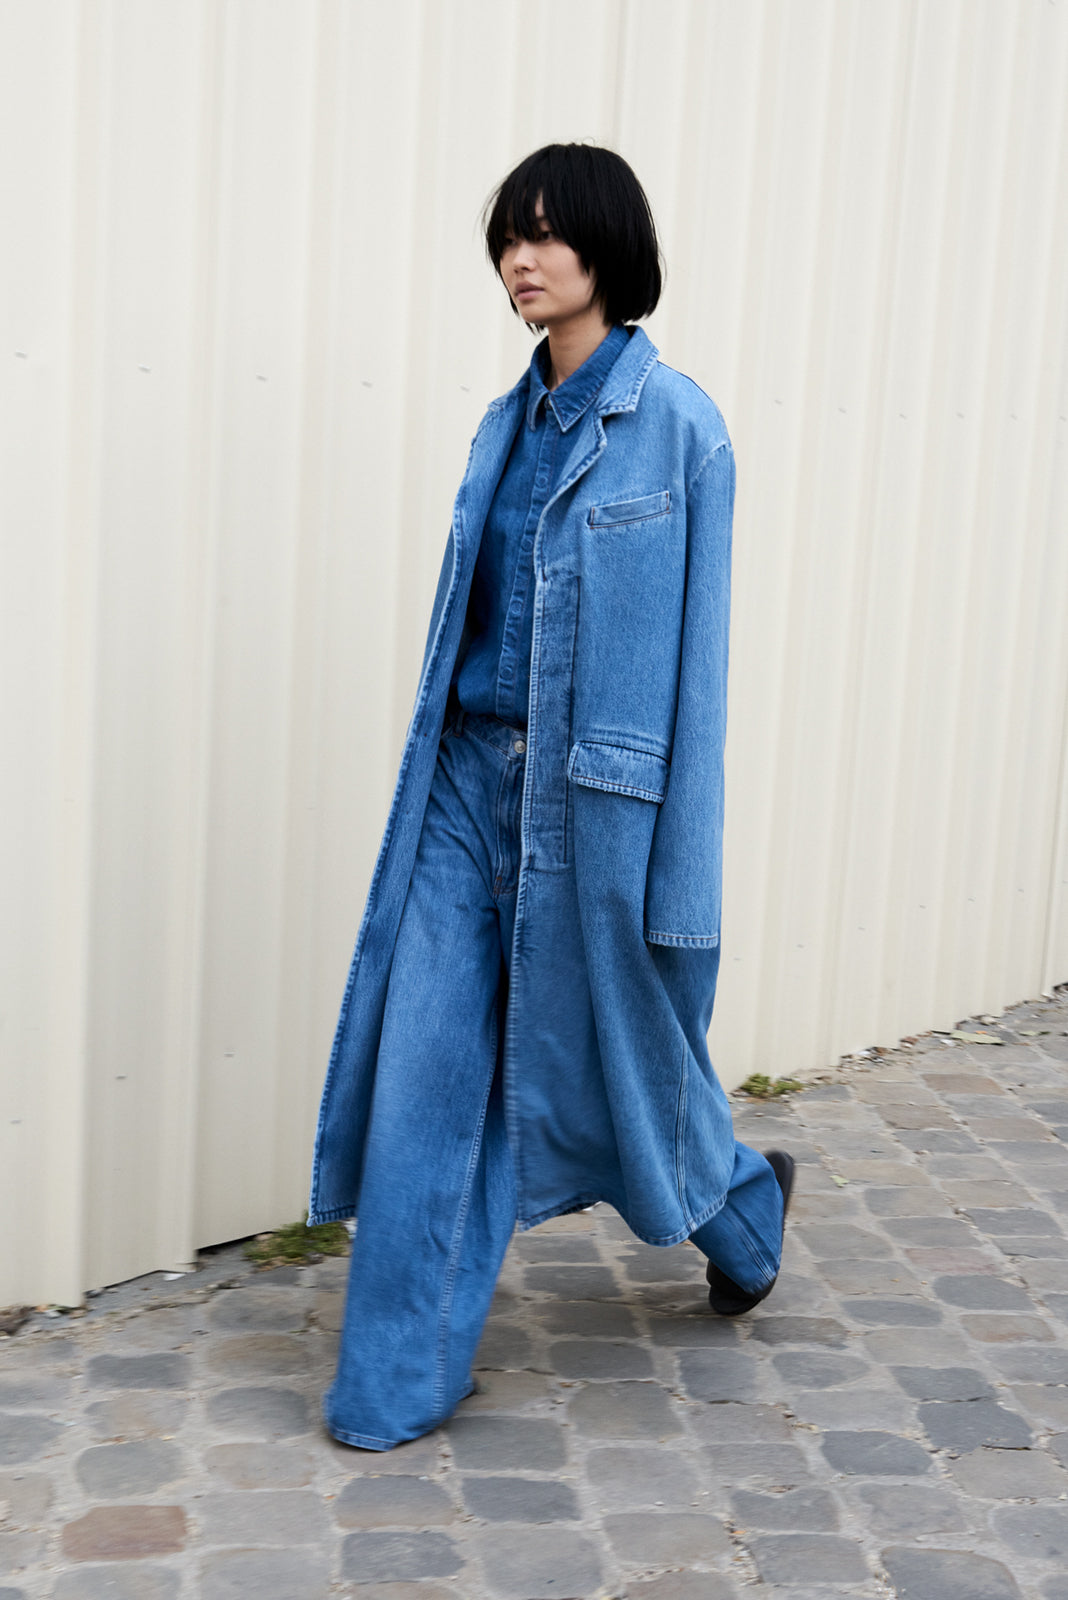 Vintage Blue Relaxed Wide Leg Jeans - GAUCHERE - Spring 24